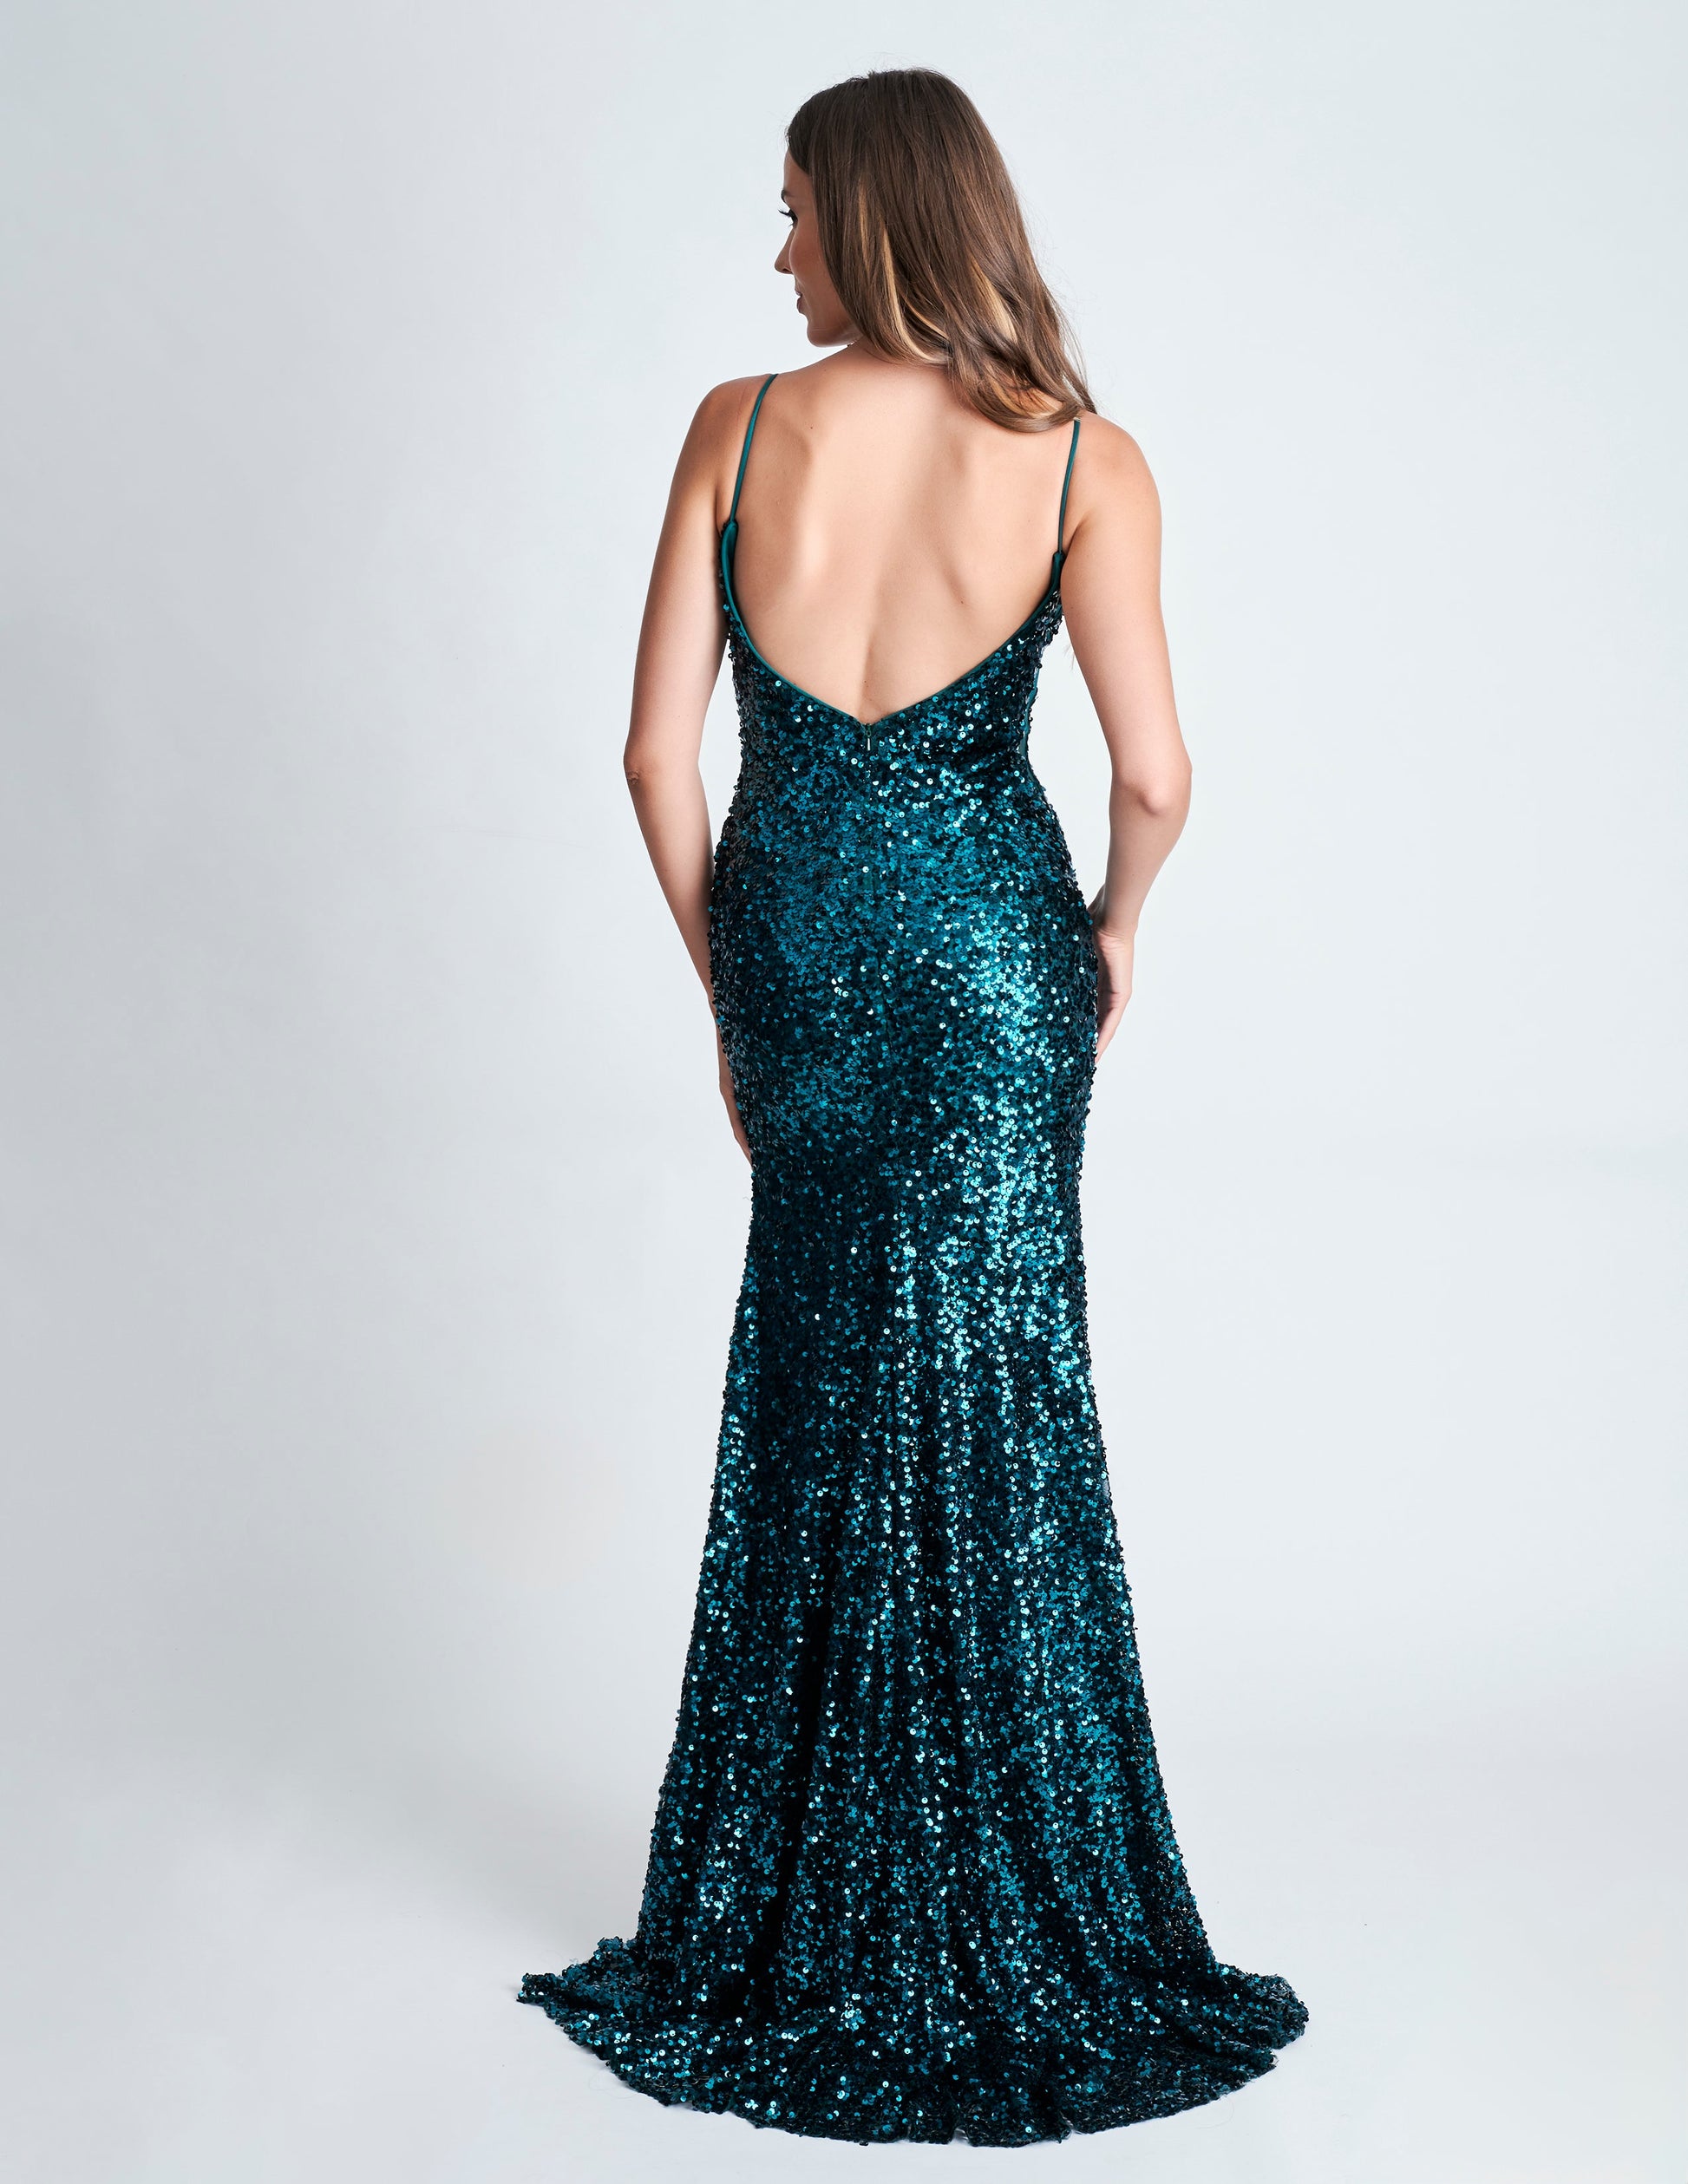 This fitted sequin long prom dress by Nina Canacci 4410 is designed to make you stand out on the dance floor. With a low back and V neck, this elegant gown features a stylish slit that will add an extra touch of sophistication to your look. Perfect for any formal occasion, this dress is sure to make you feel confident and glamorous.